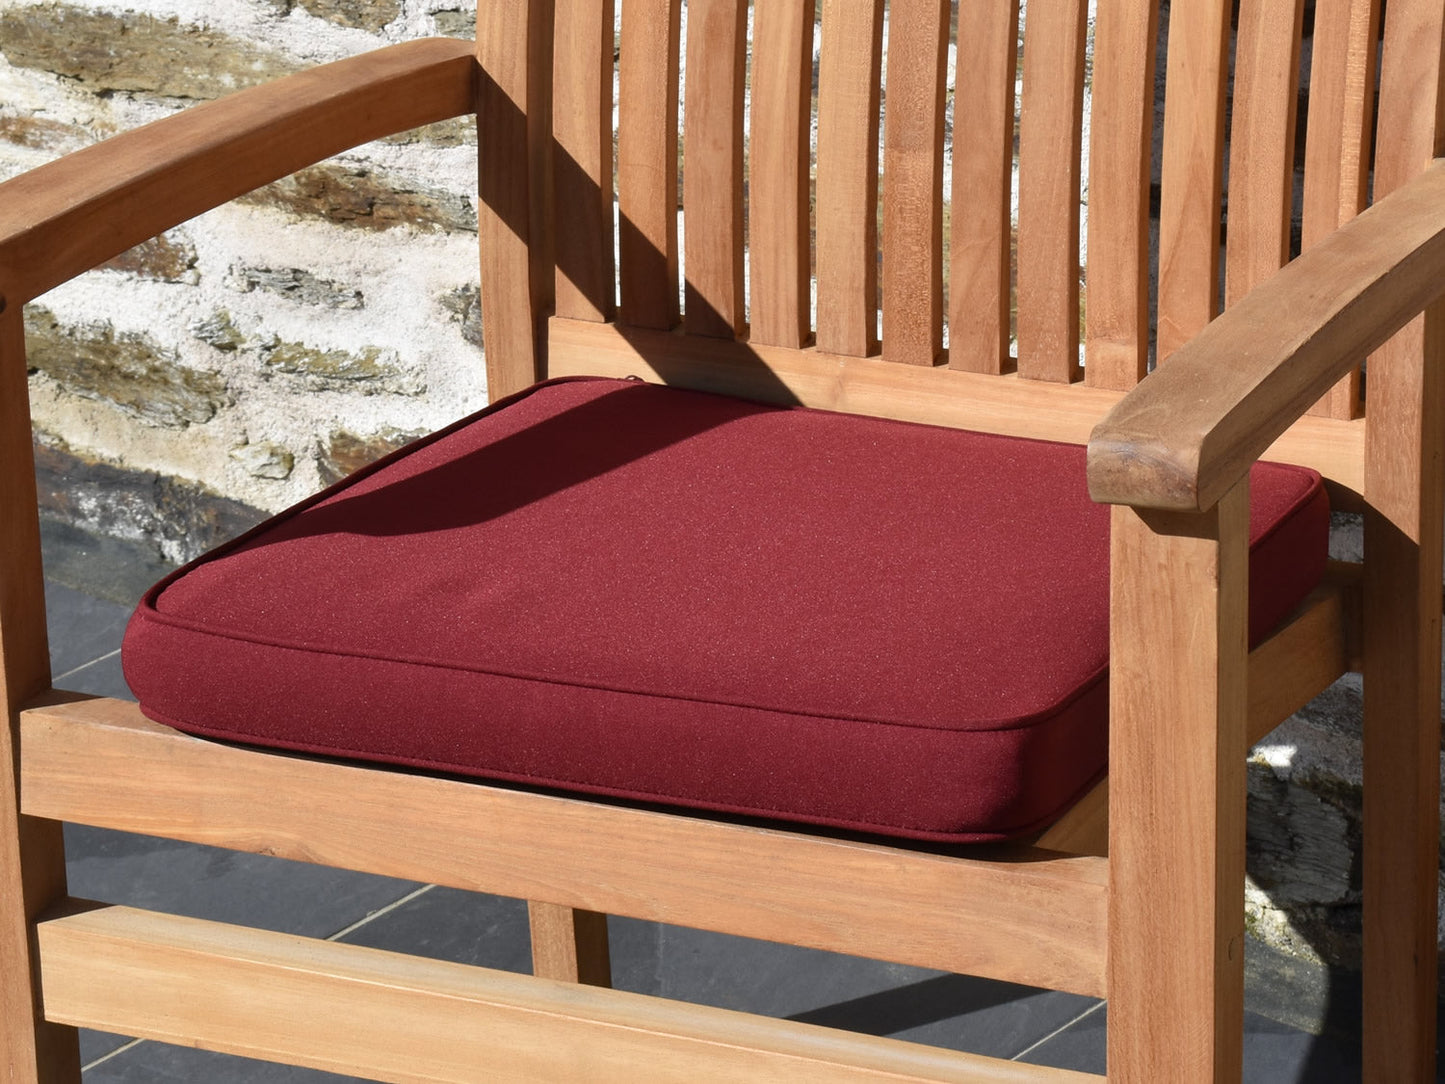 Large outdoor garden seat pad Burgundy, close view